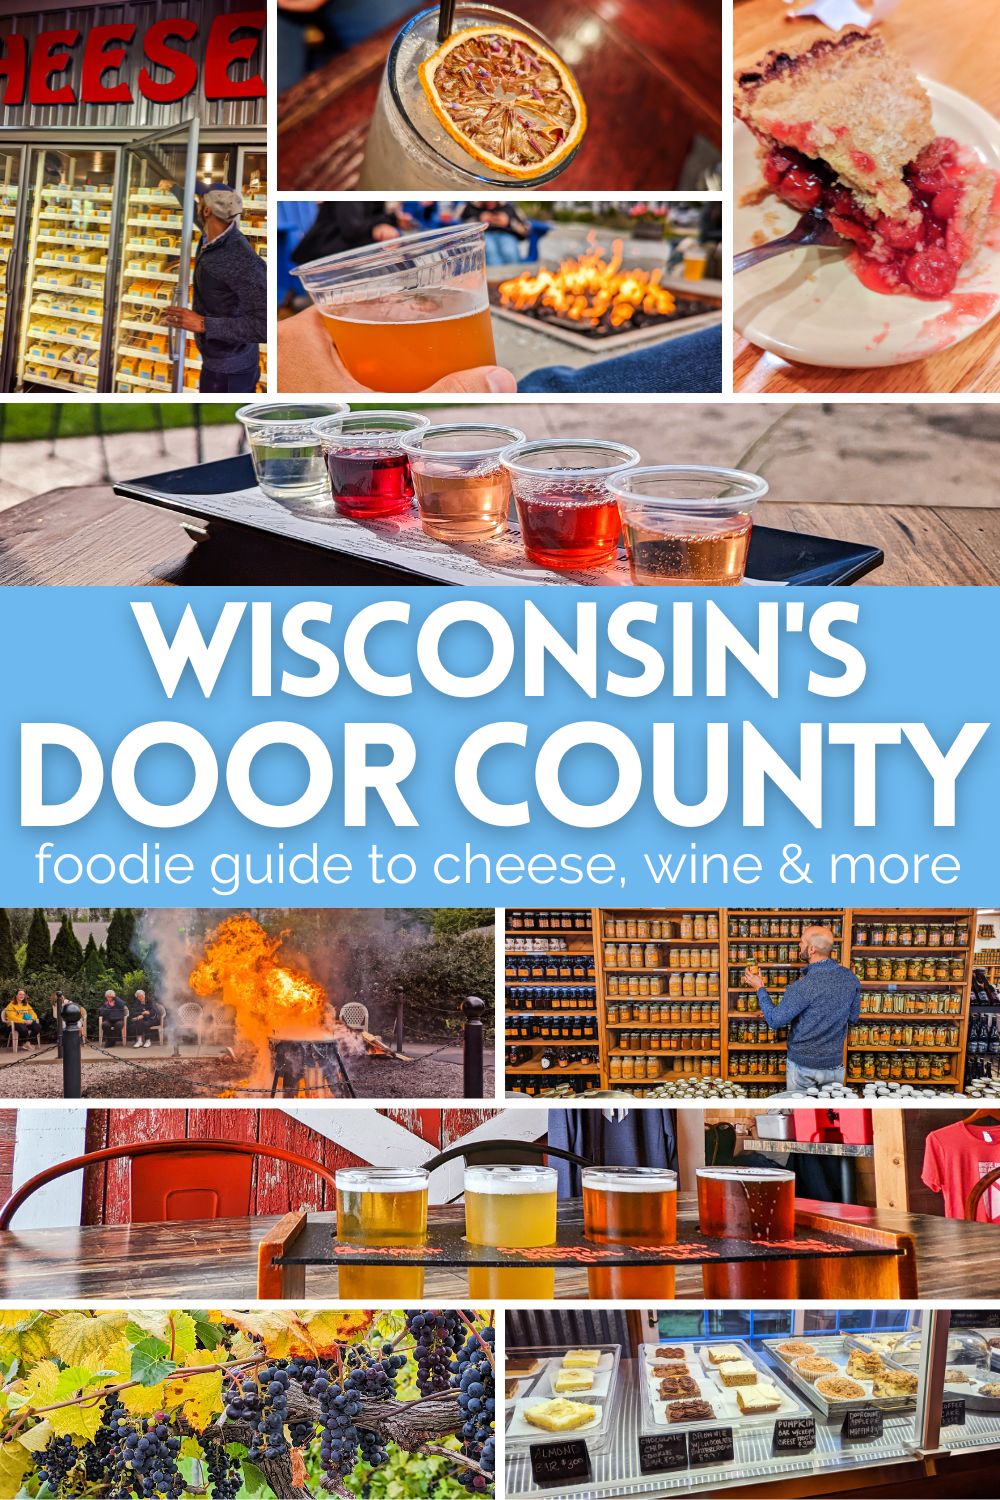 Door County, Wisconsin is a foodie paradise with cheese, cider and great places to eat all along the peninsula. Guide to farm stands, tasting rooms and great eats in Door County.